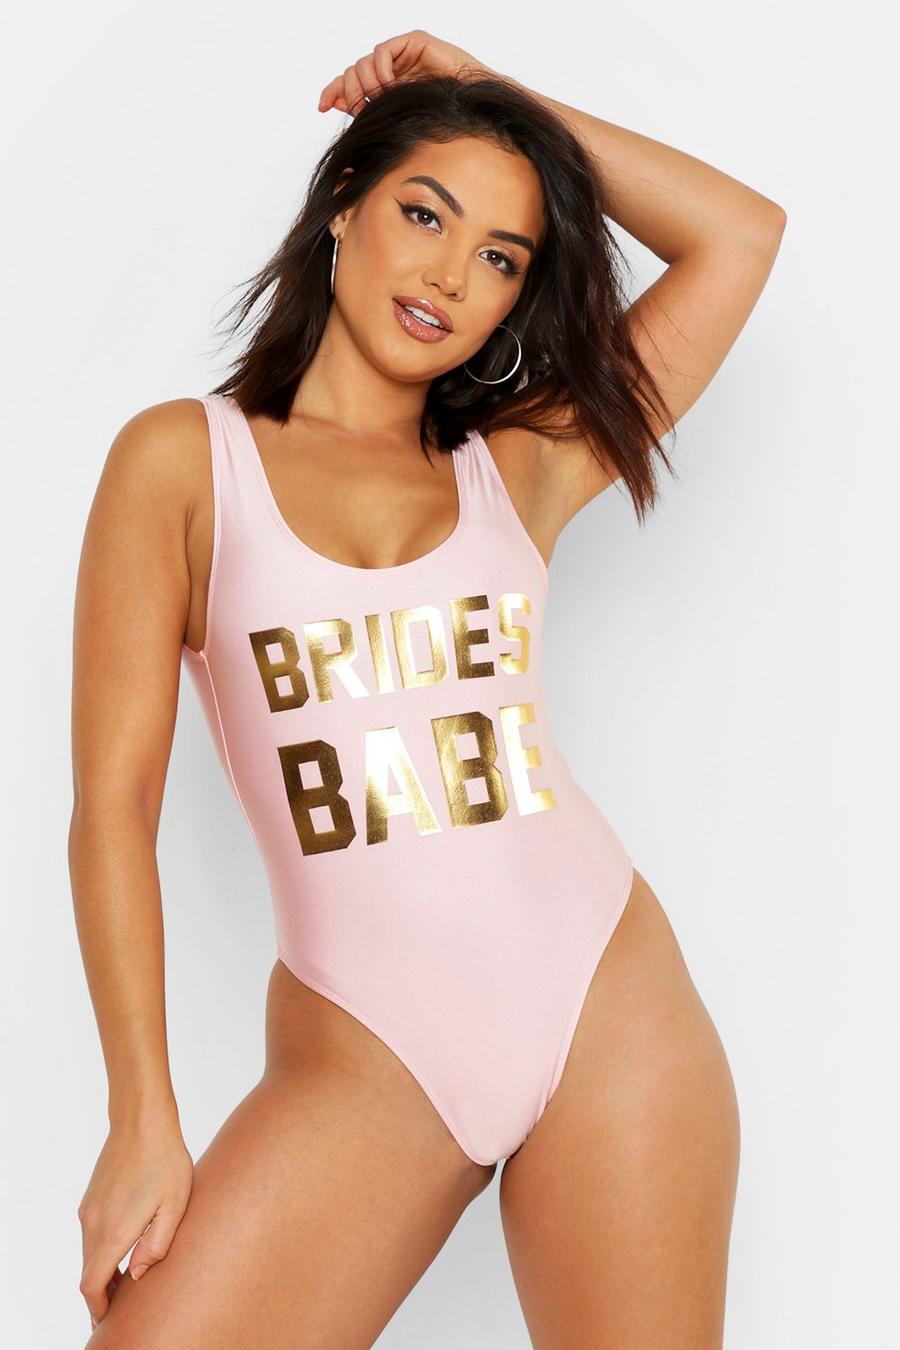 Brides Babe Hen Scoop Swimsuit image number 1